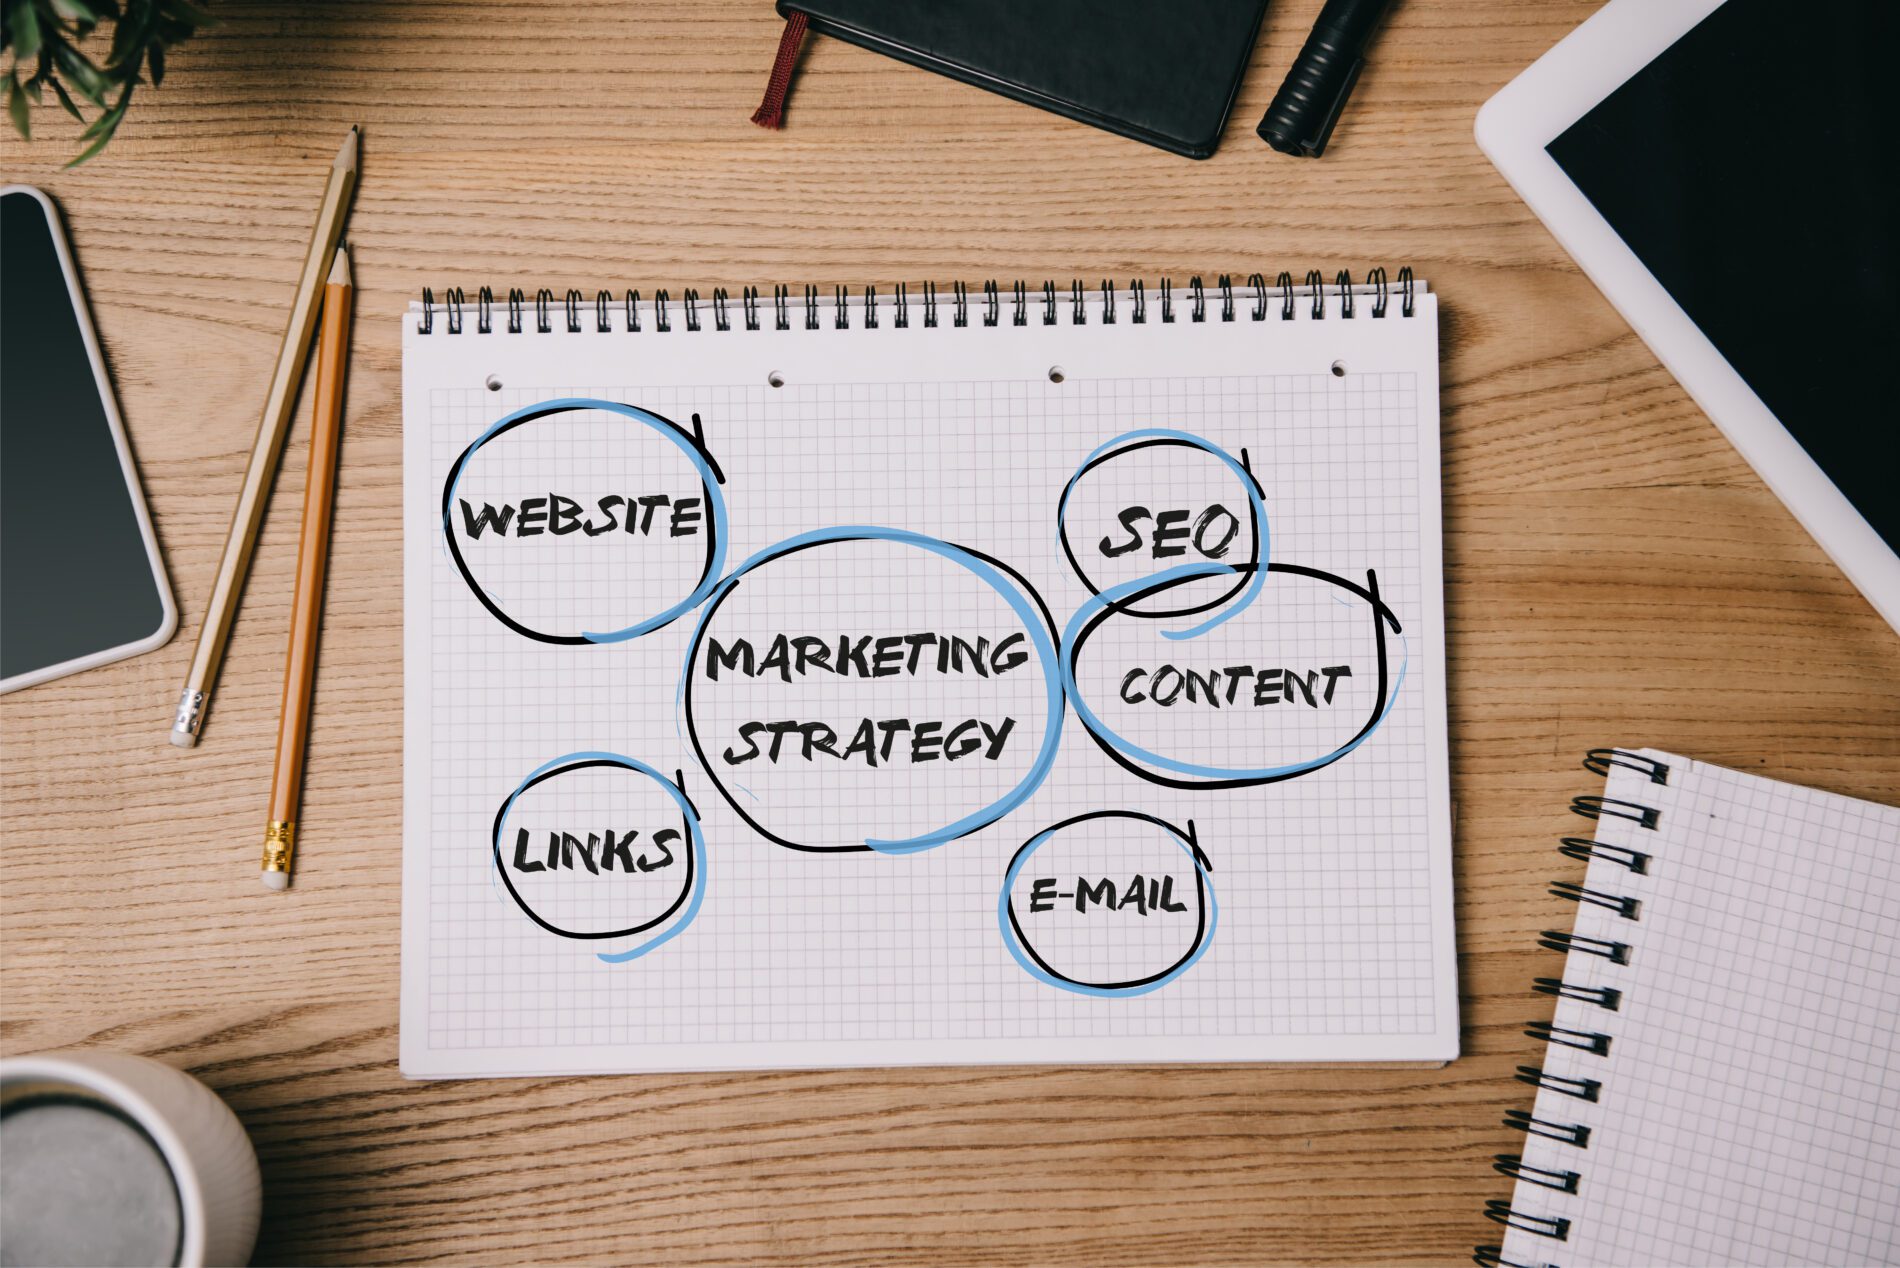 Comparison Between SEO and Content Marketing